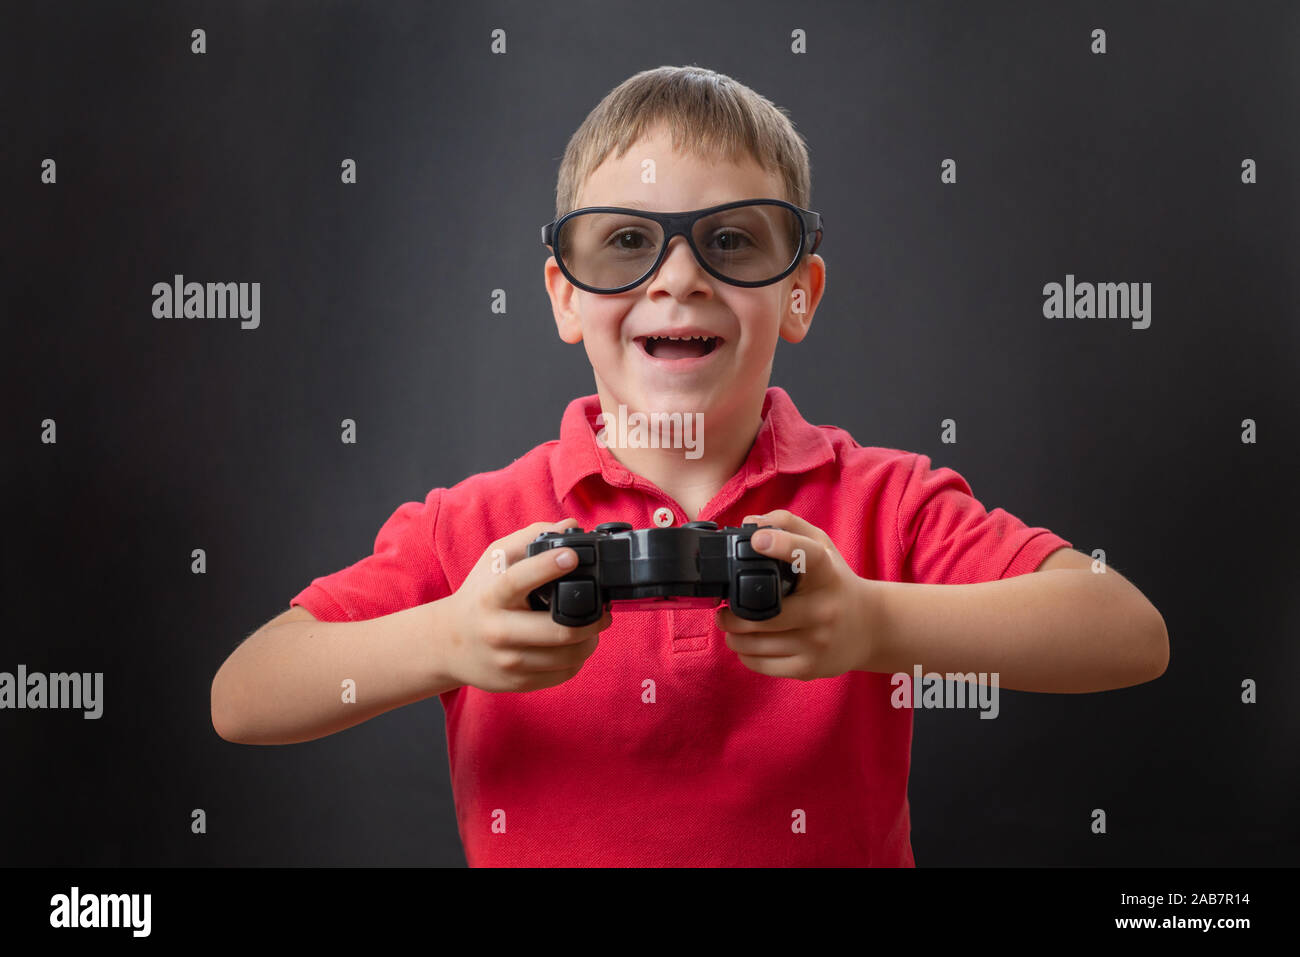 The boy is smiling with 3d glasses and holding a gaming joypad in his hands. Stock Photo